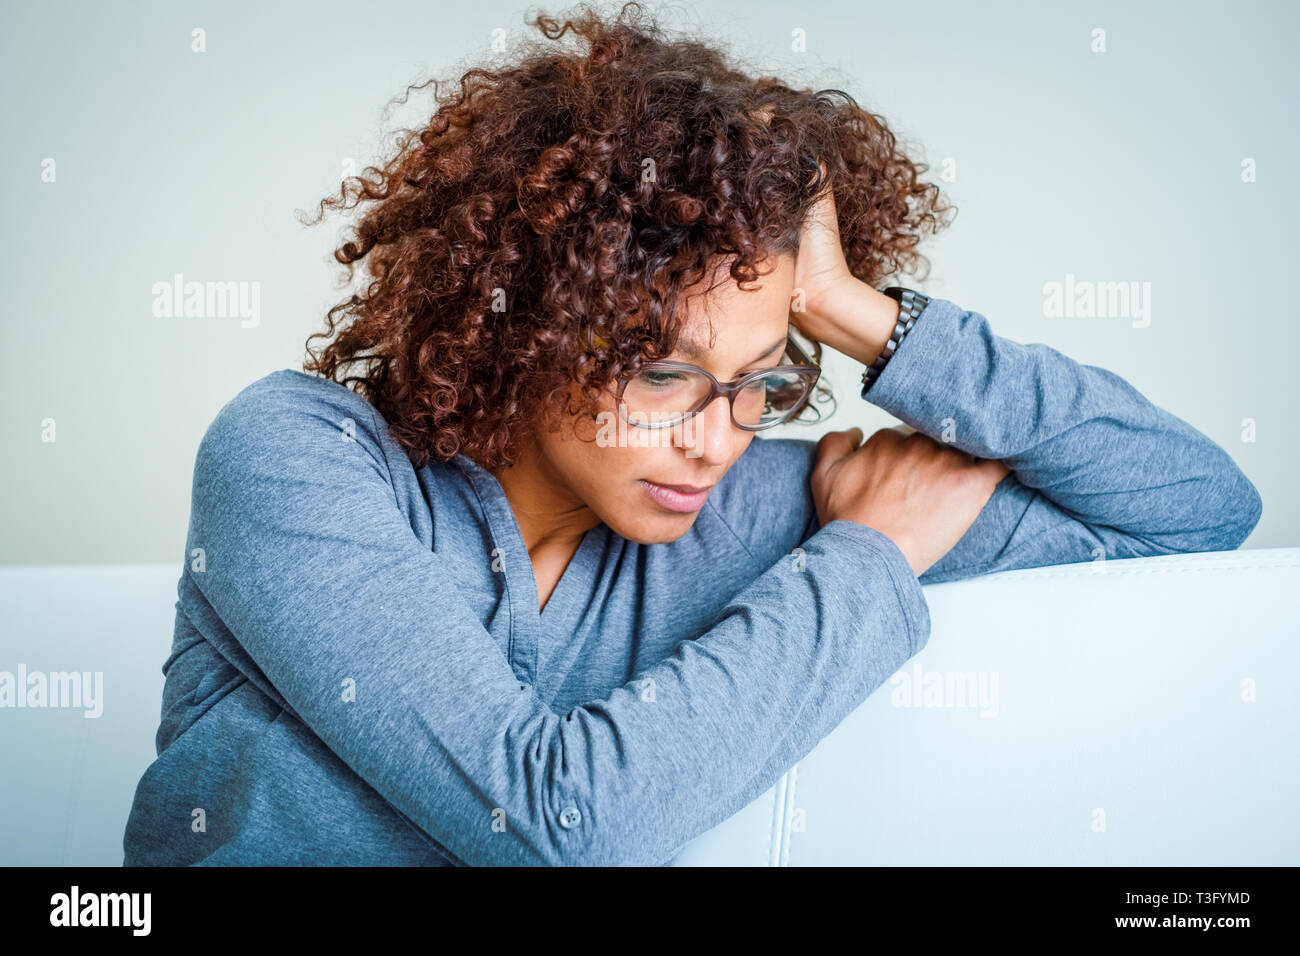 Black woman can't get over relationship breakup Stock Photo